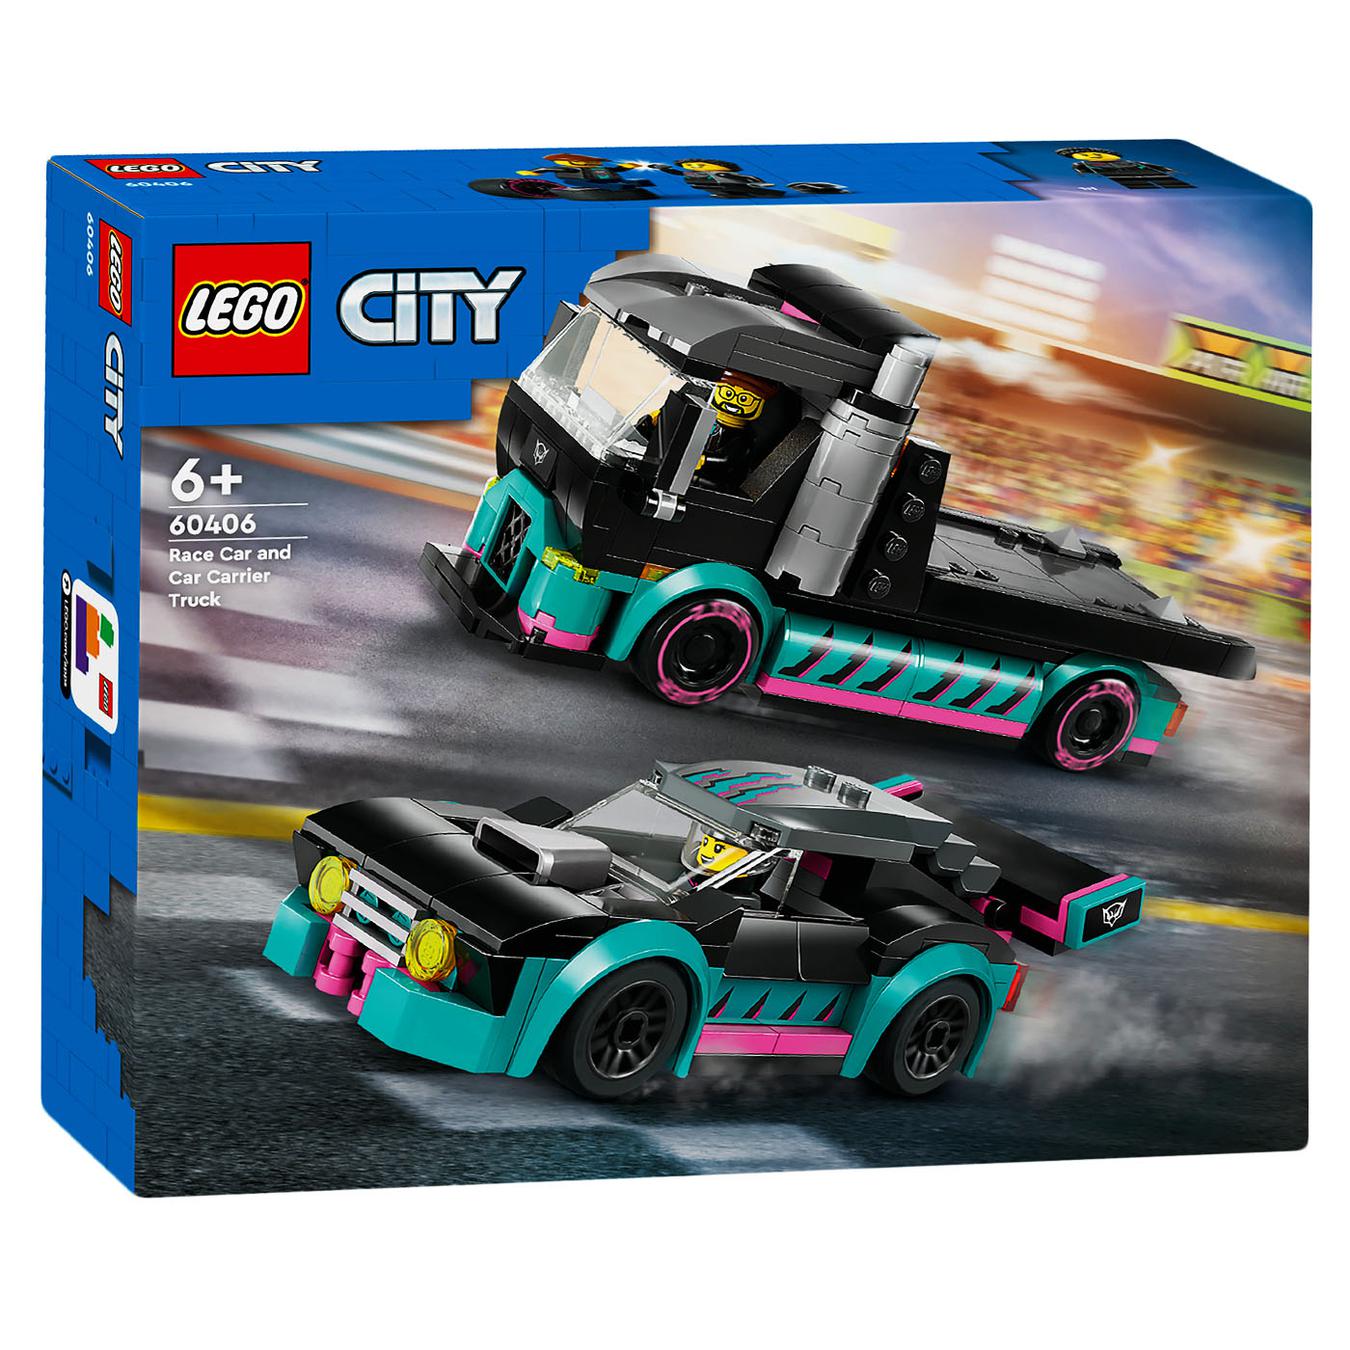 Constructor LEGO City 60406 Car for racing and transporter